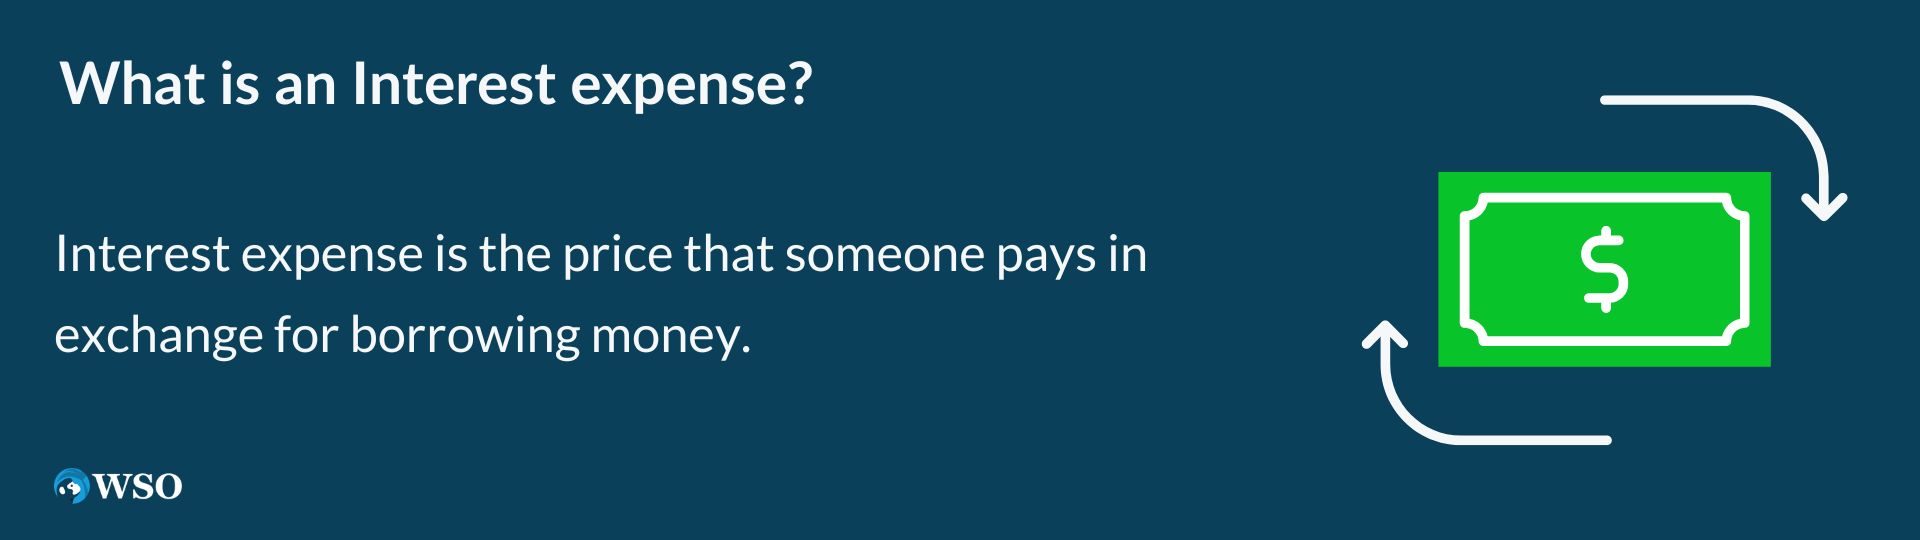 What is an Interest expense?